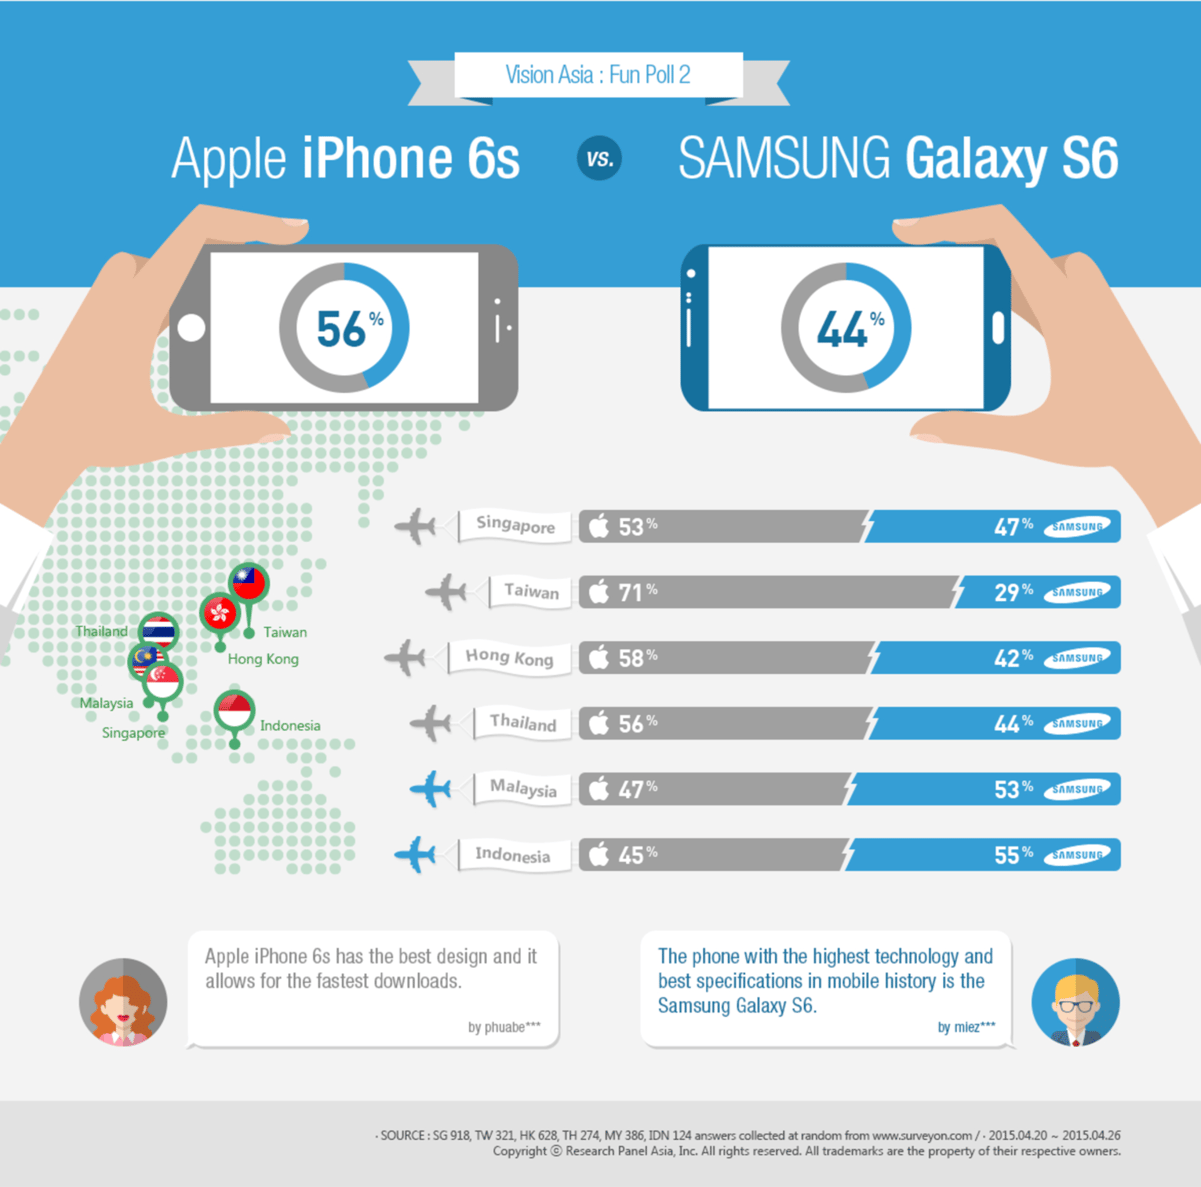 [Infographic] Asia Research Poll: Apple vs. Samsung | EYE ON ASIA